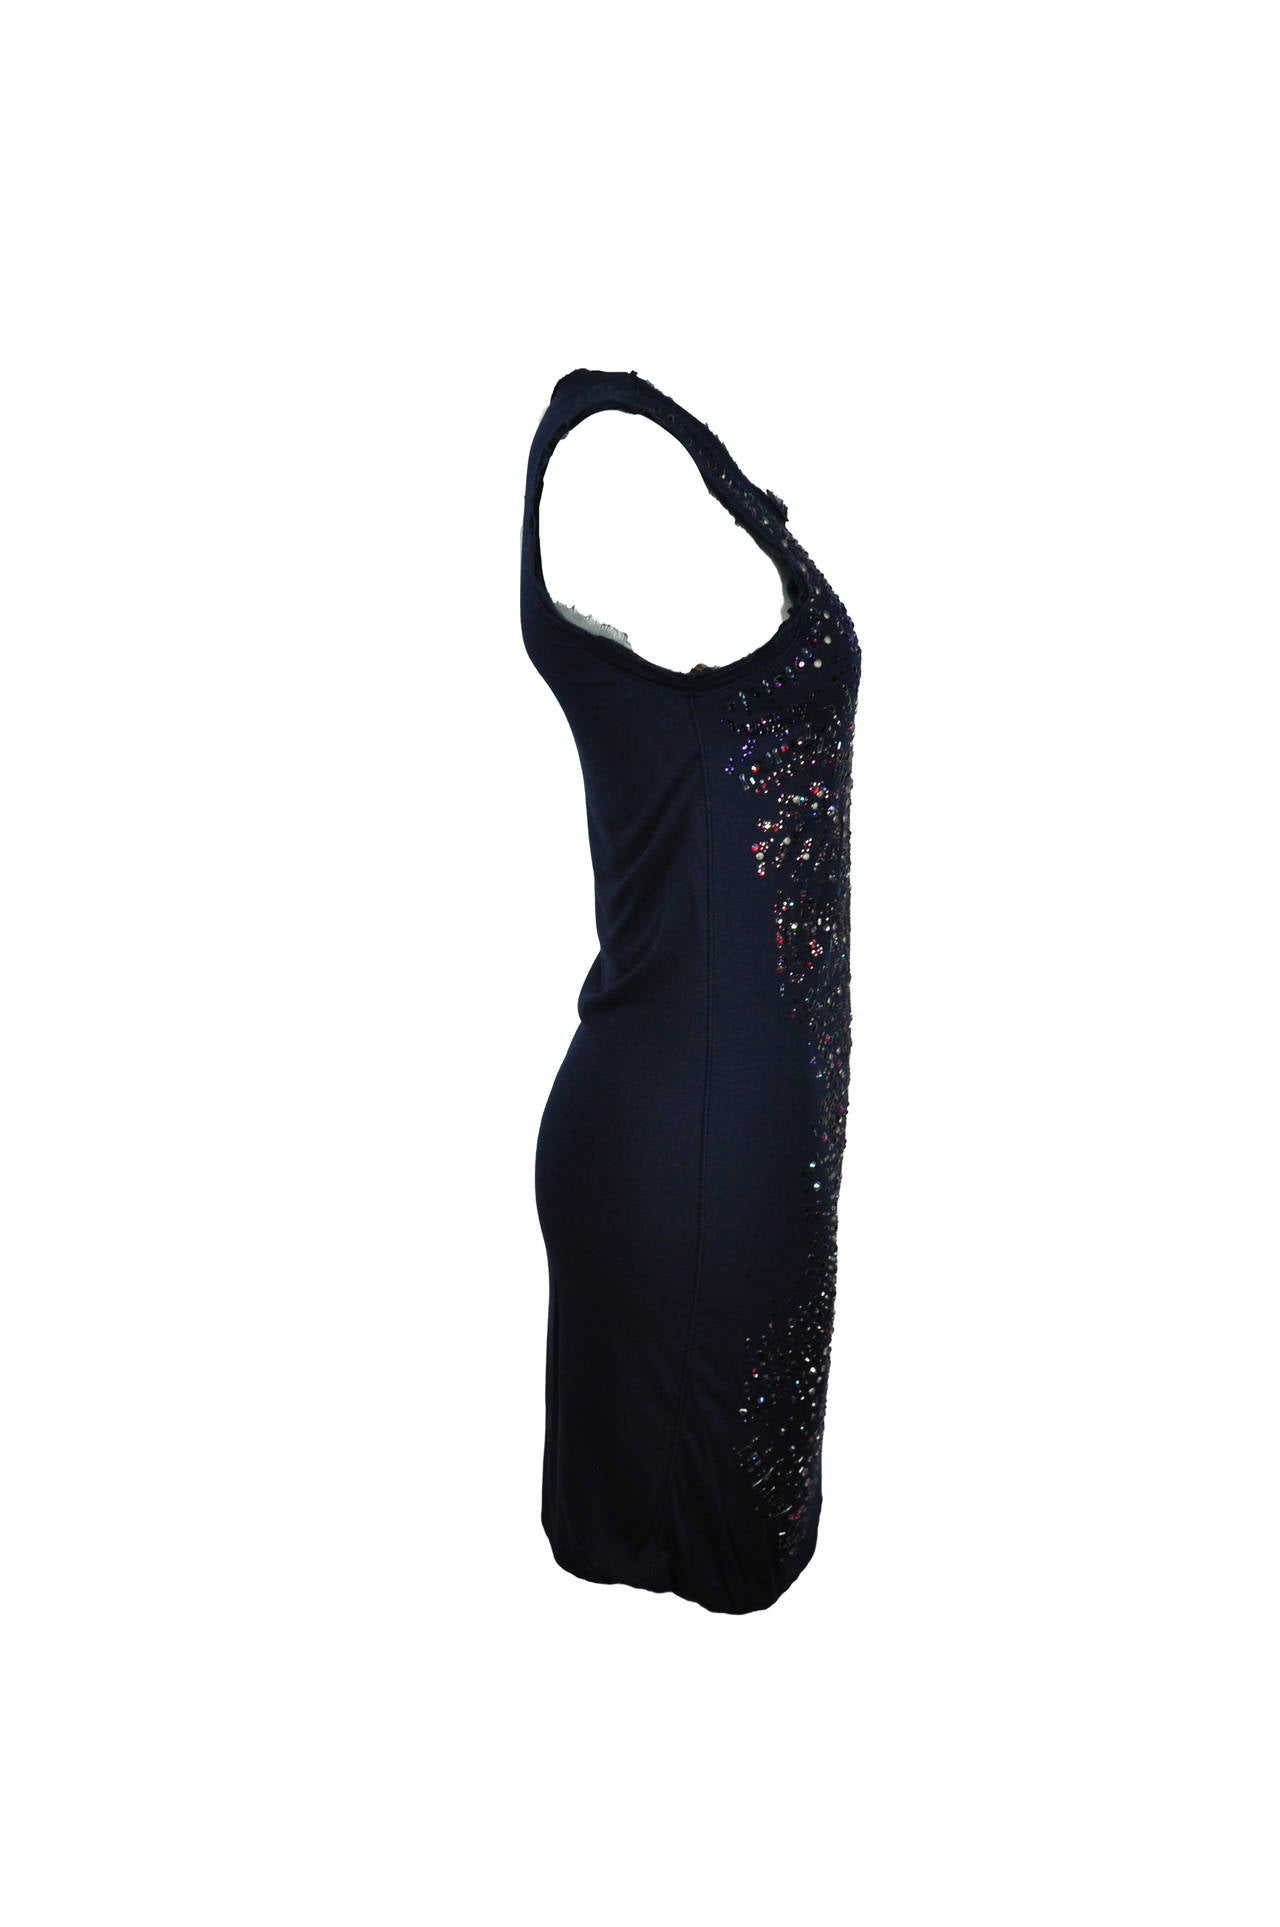 Roberto Cavalli Indigo with Multi-color Crystals Stretch Mini Dress In Excellent Condition For Sale In Hong Kong, Hong Kong